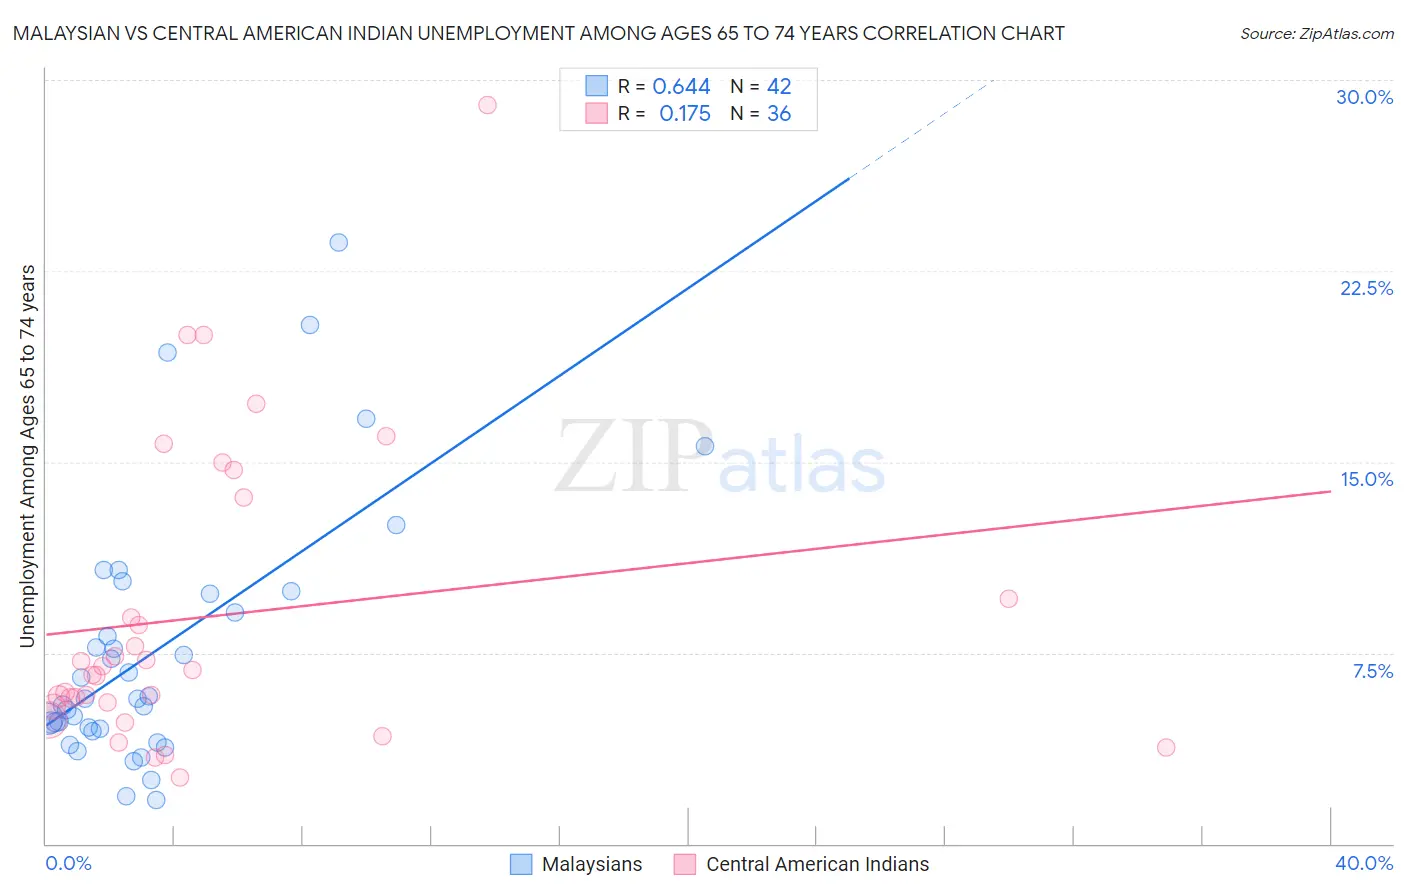 Malaysian vs Central American Indian Unemployment Among Ages 65 to 74 years